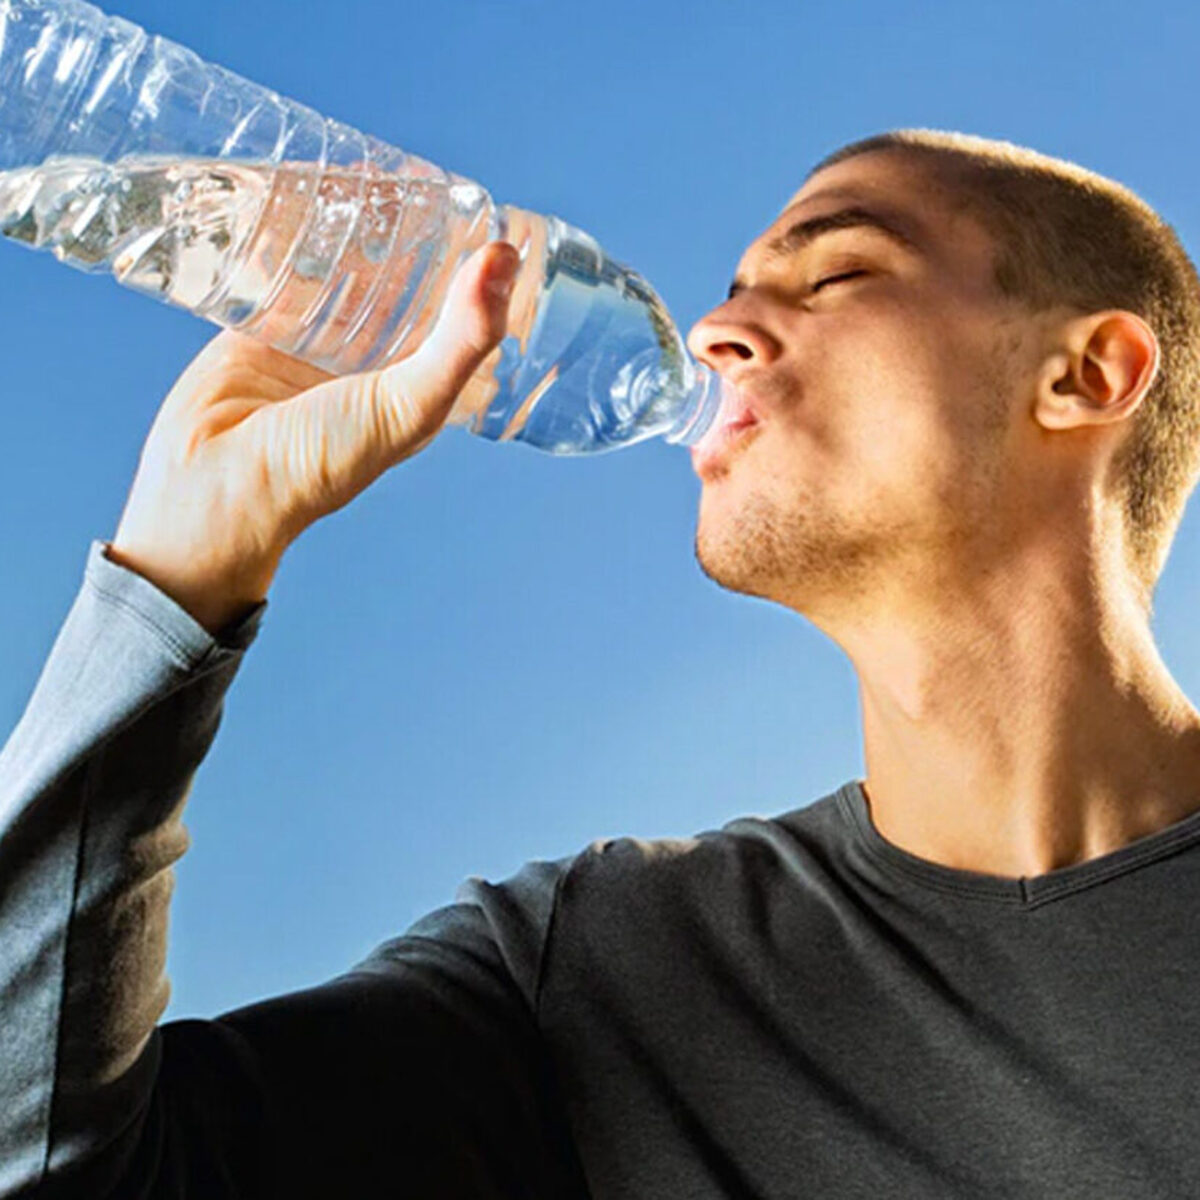 National Hydration Day - June 23